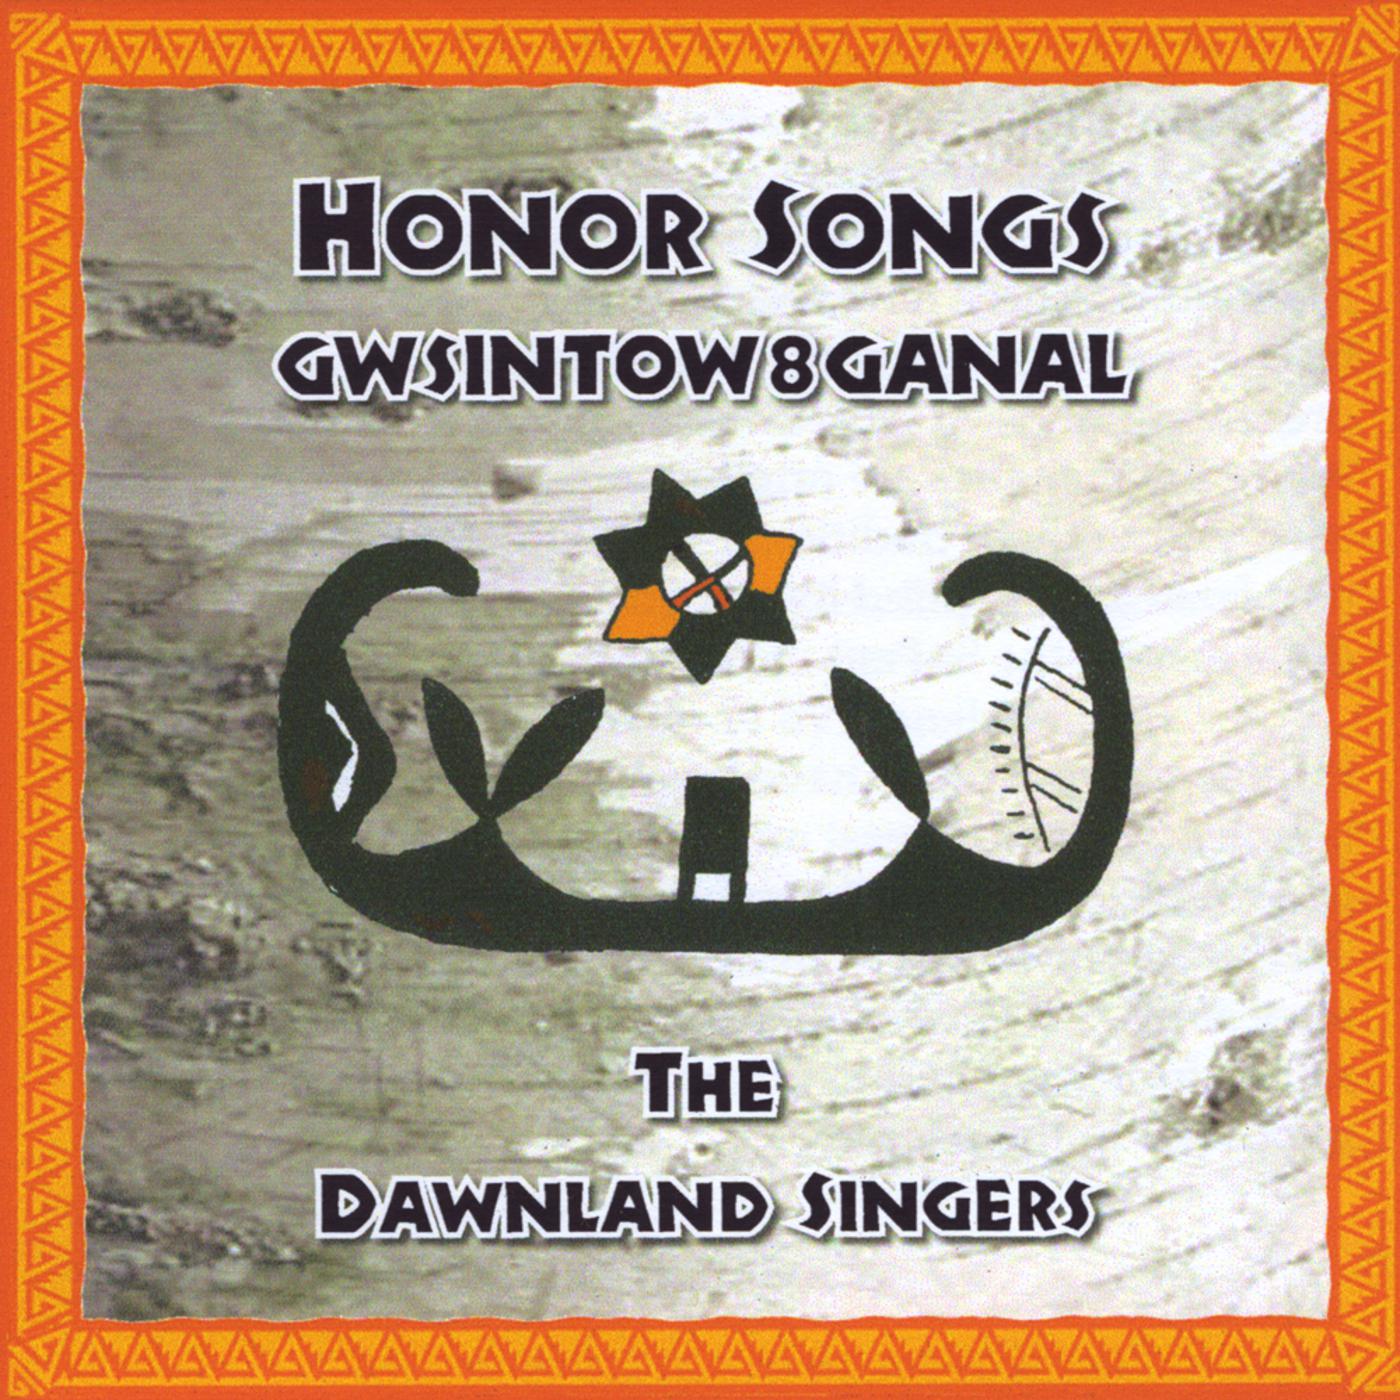 The Dawnland Singers - Chief Homer St. Francis